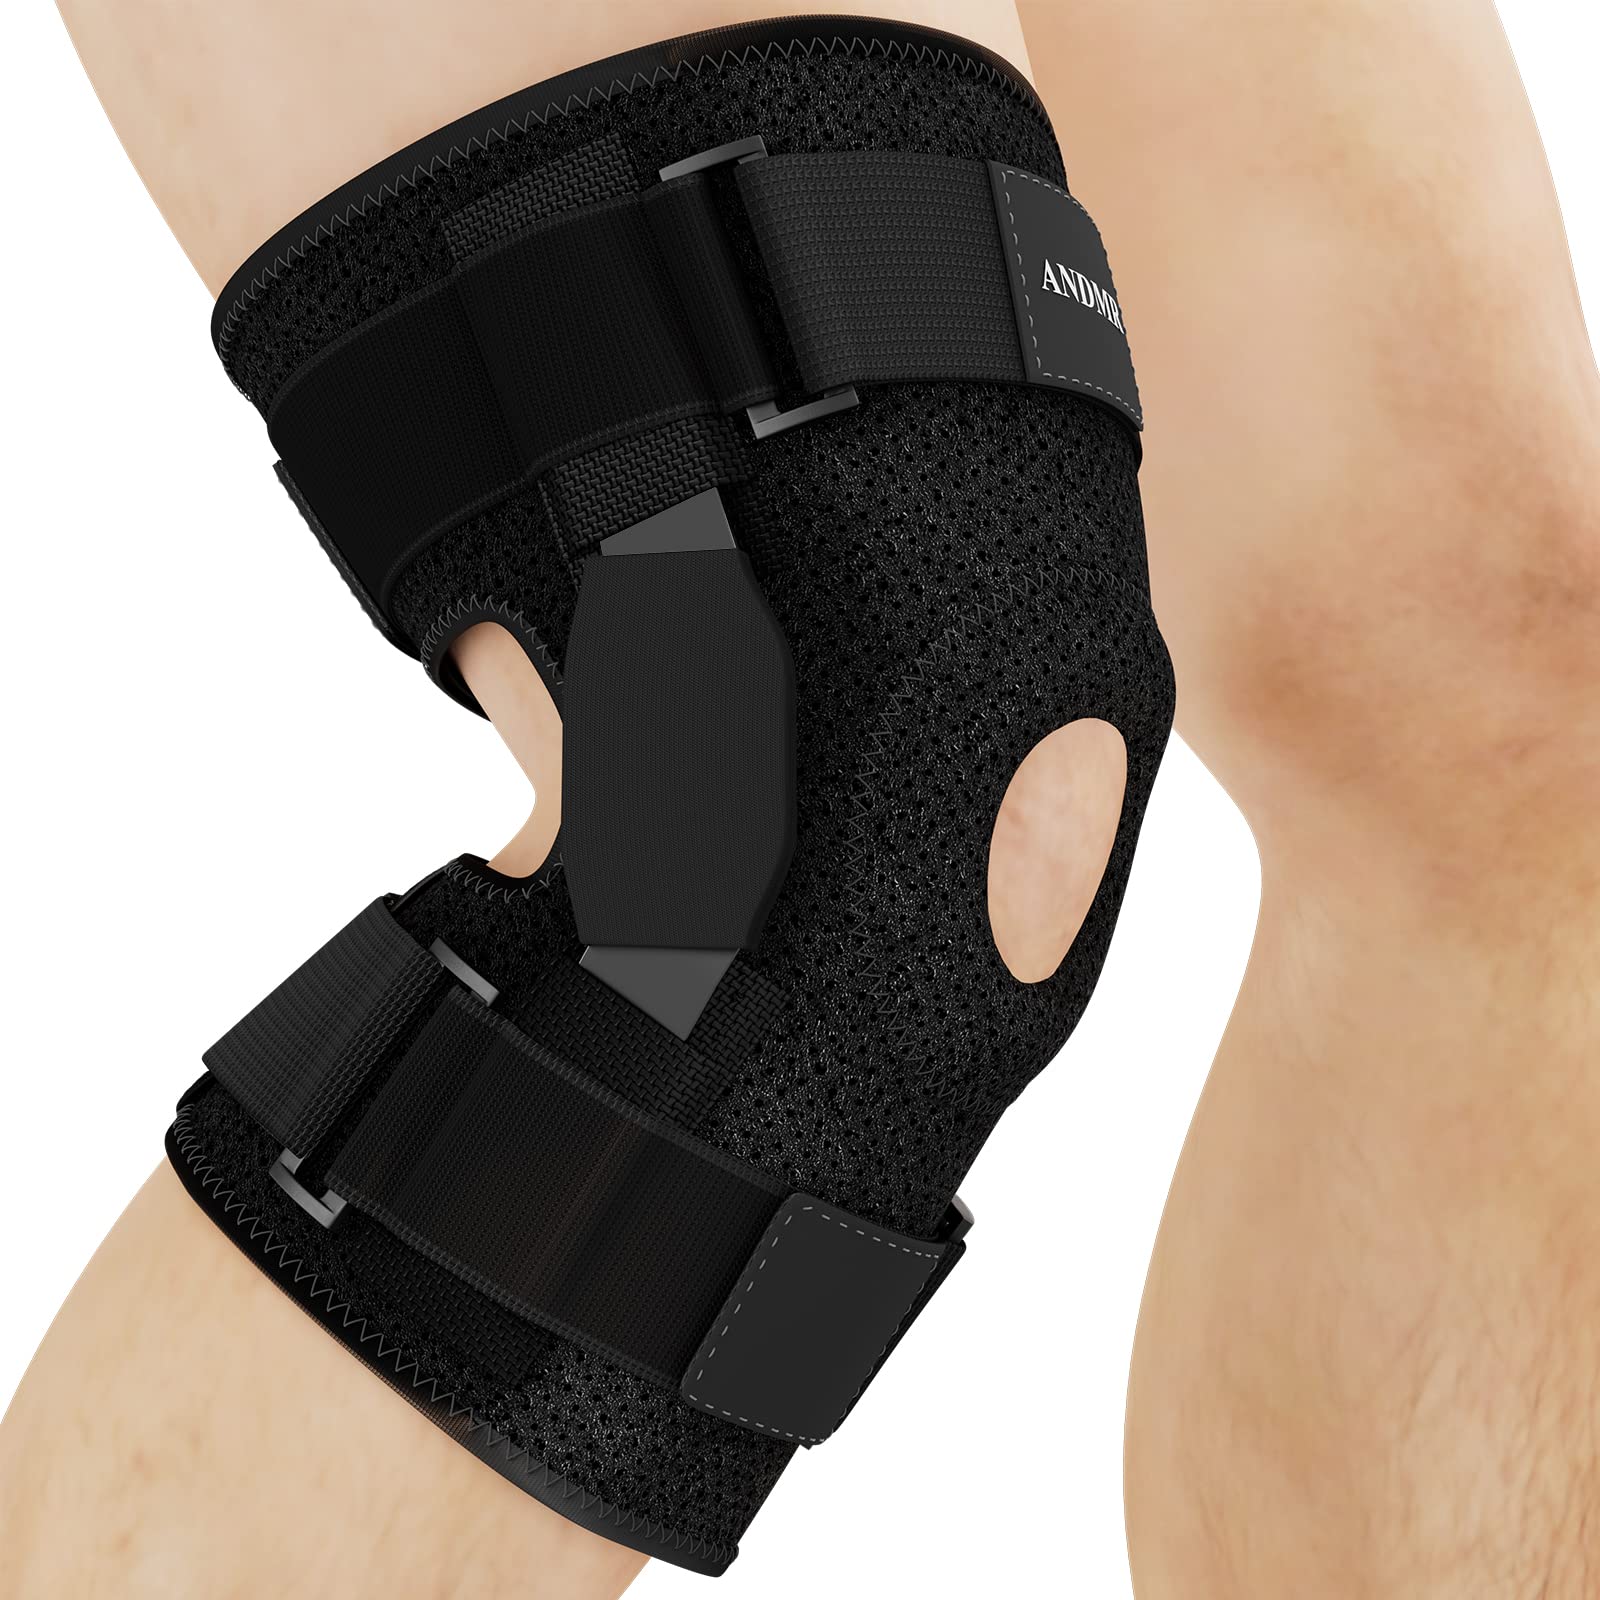 Sparthos Hinged Knee Brace - Relieves ACL, MCL, Meniscus Tear, Arthritis,  Tendon Pain - Open Patella Design with Dual Metal Side Stabilizers -  Support